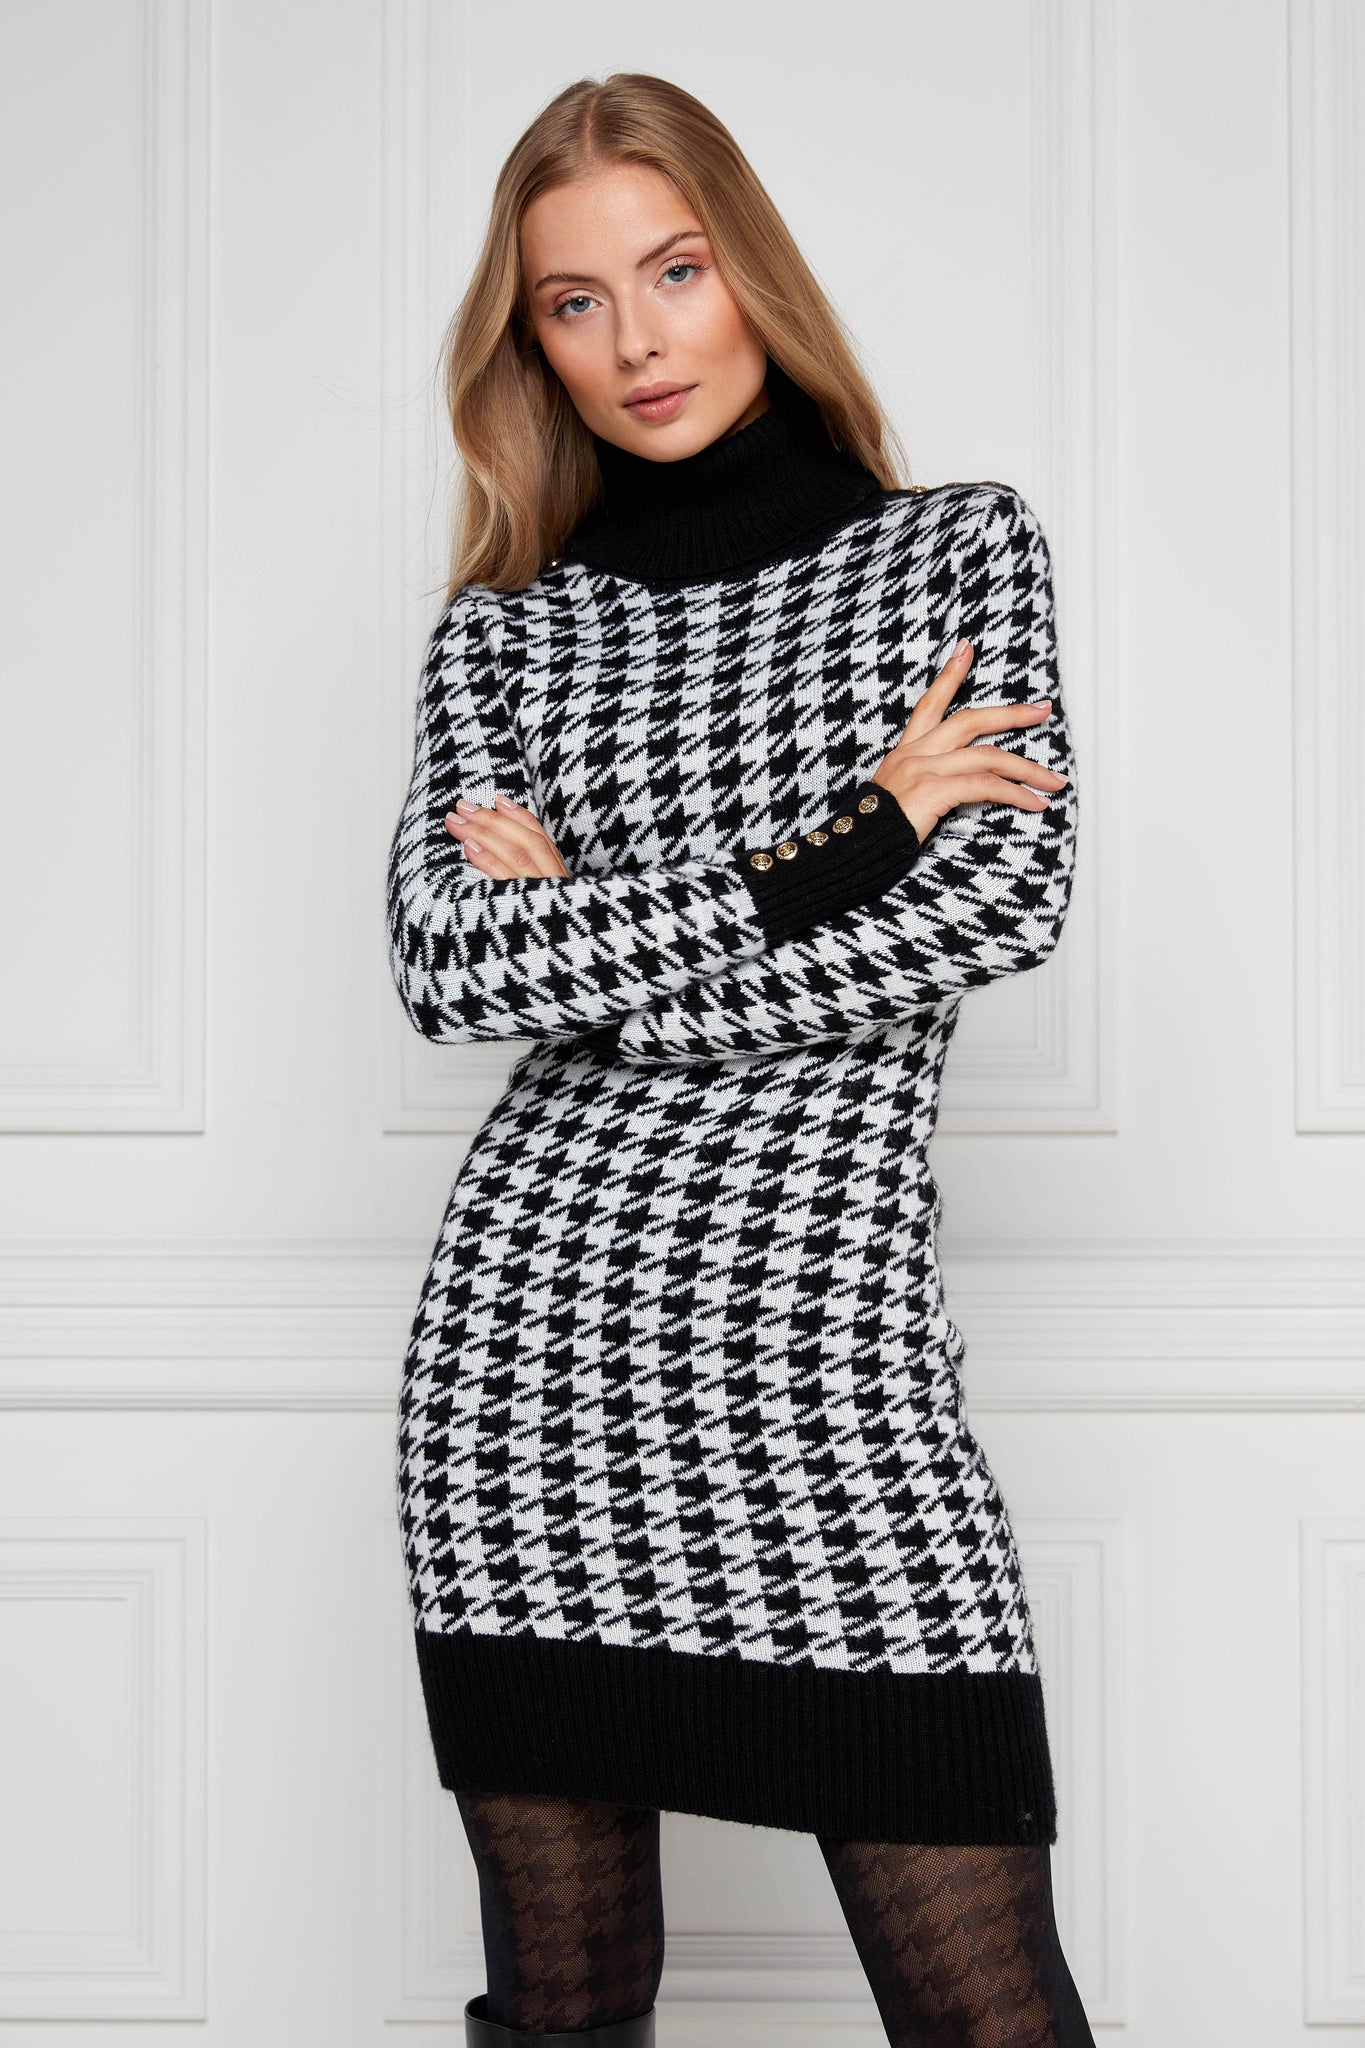 womens black and white houndstooth roll neck jumper dress with contrast black cuffs and ribbed hem with gold button detail on the cuffs and shoulders